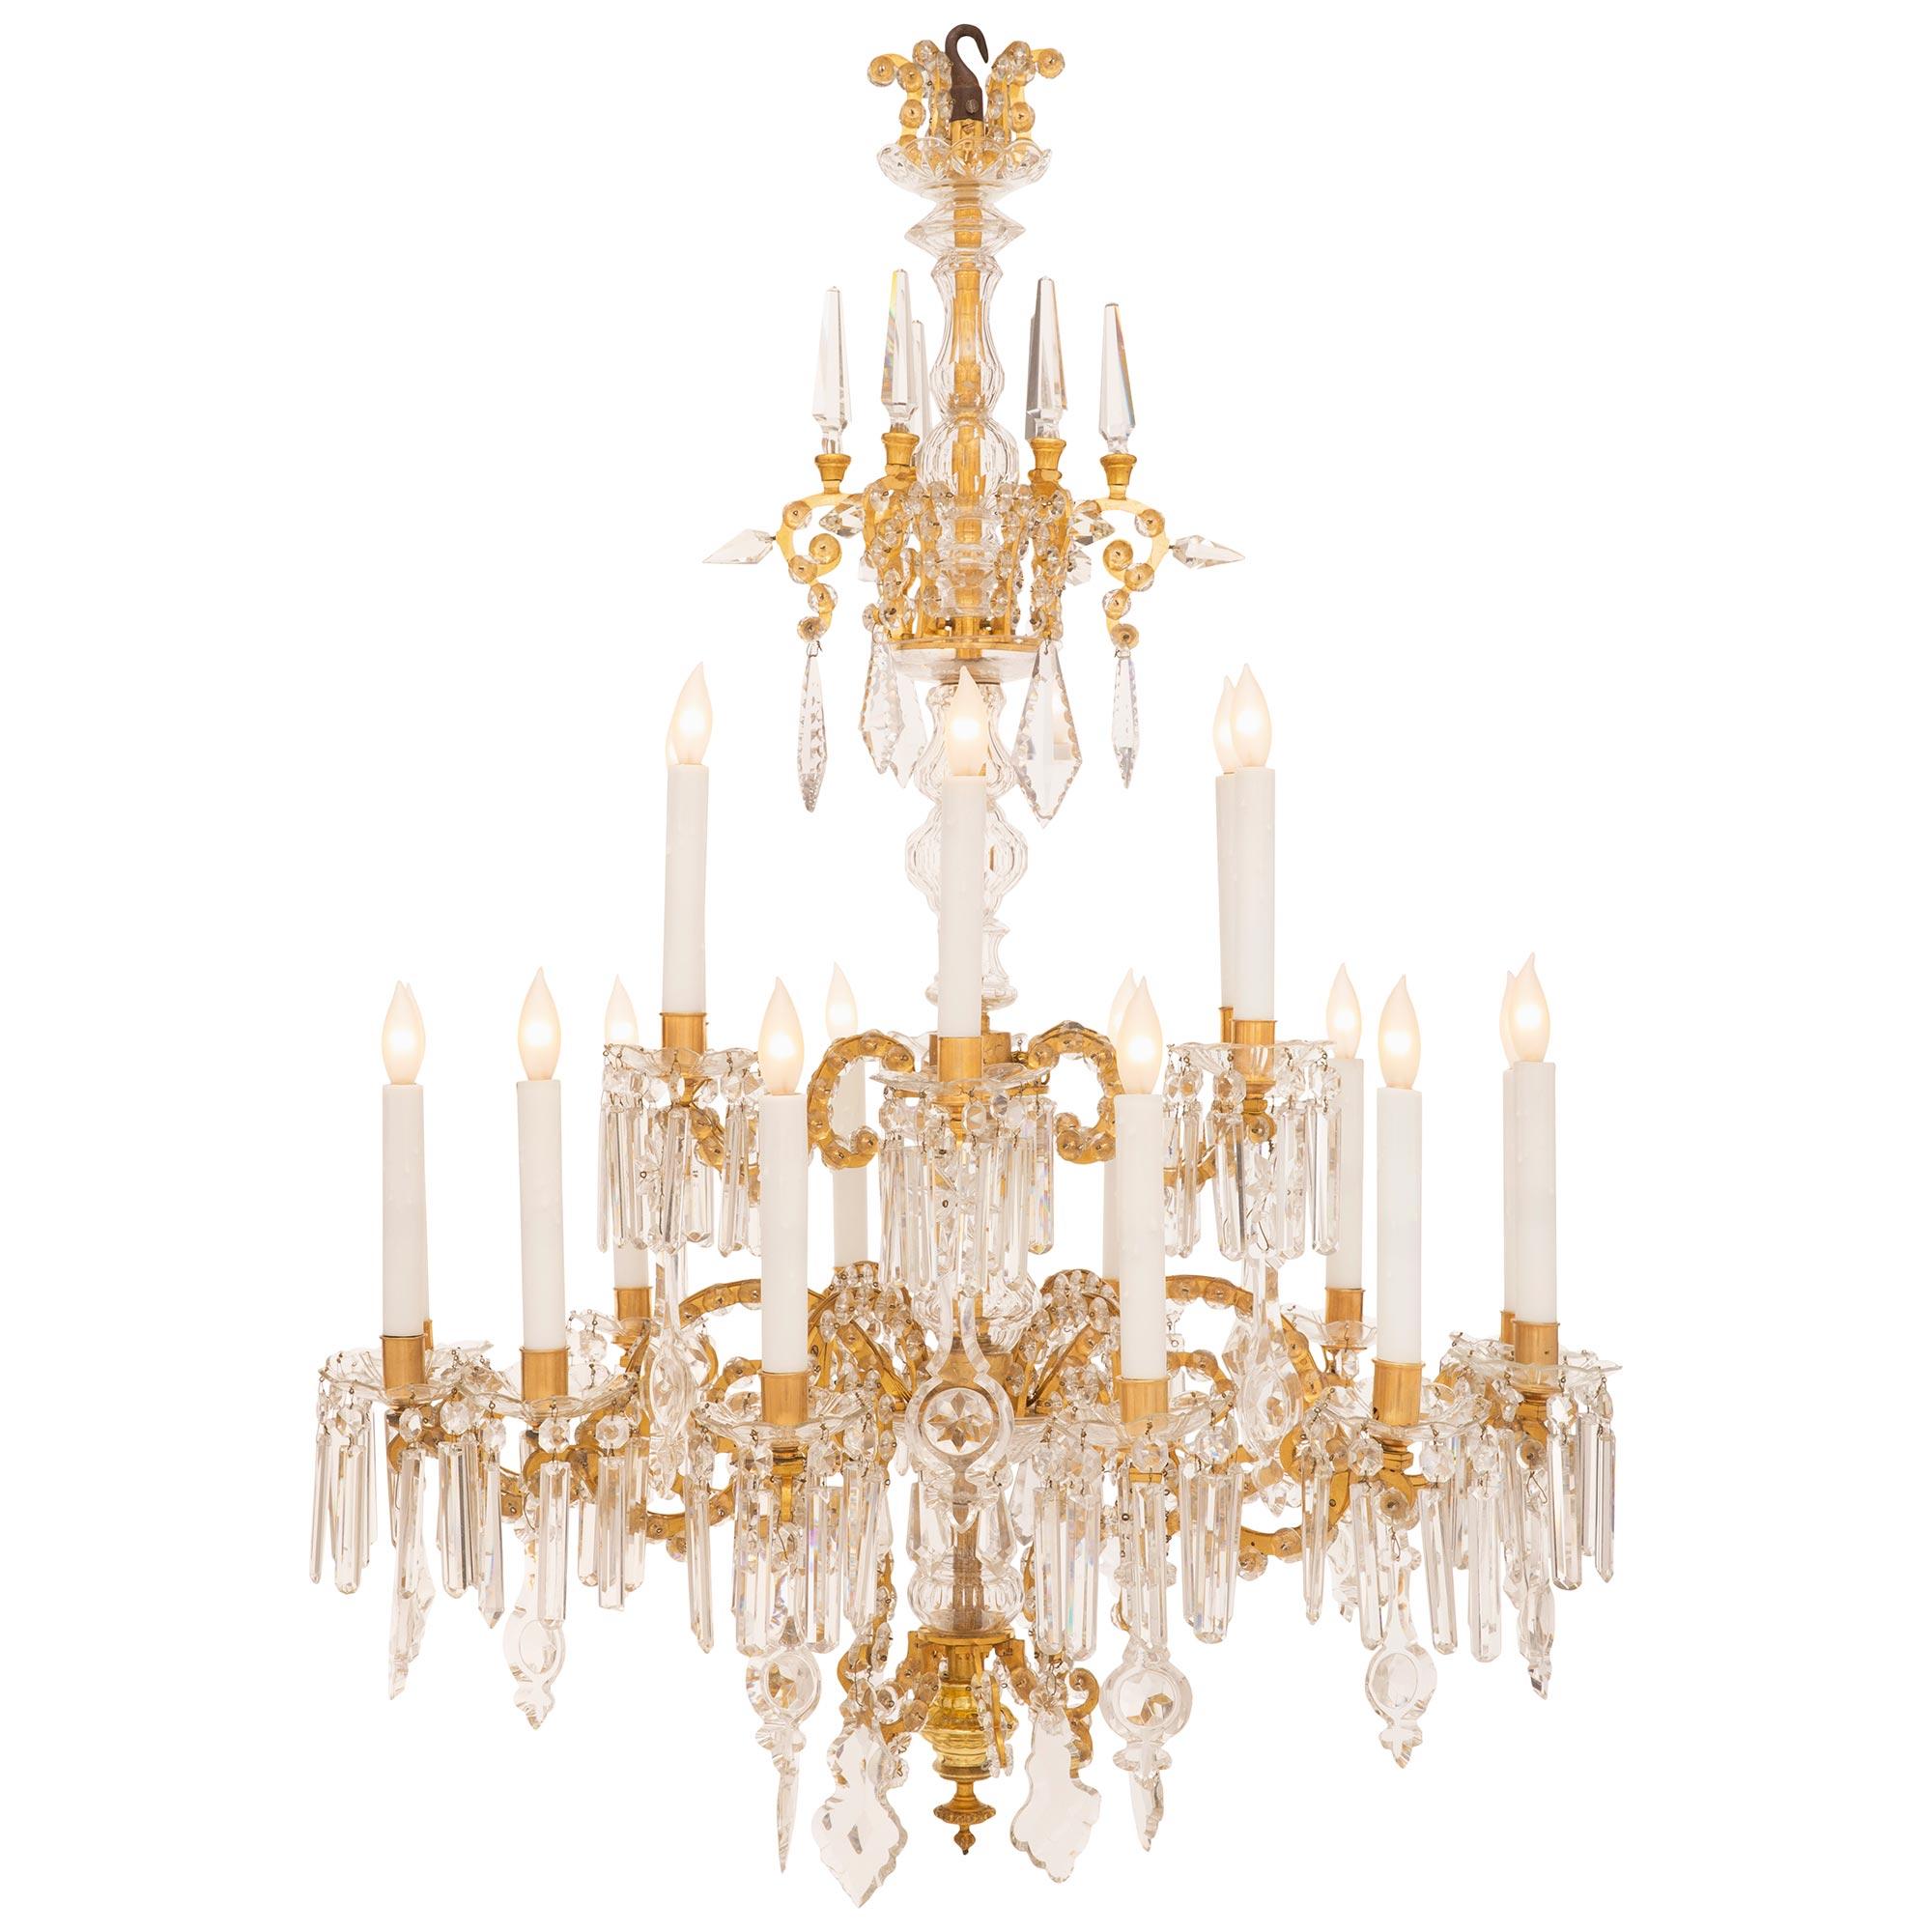 A stunning Italian 19th century Venetian st. ormolu and crystal chandelier. The eighteen arm two tier chandelier is centered by a bottom topie shaped finial below most decorative scrolled designs adorned with charming rosettes with the central fut